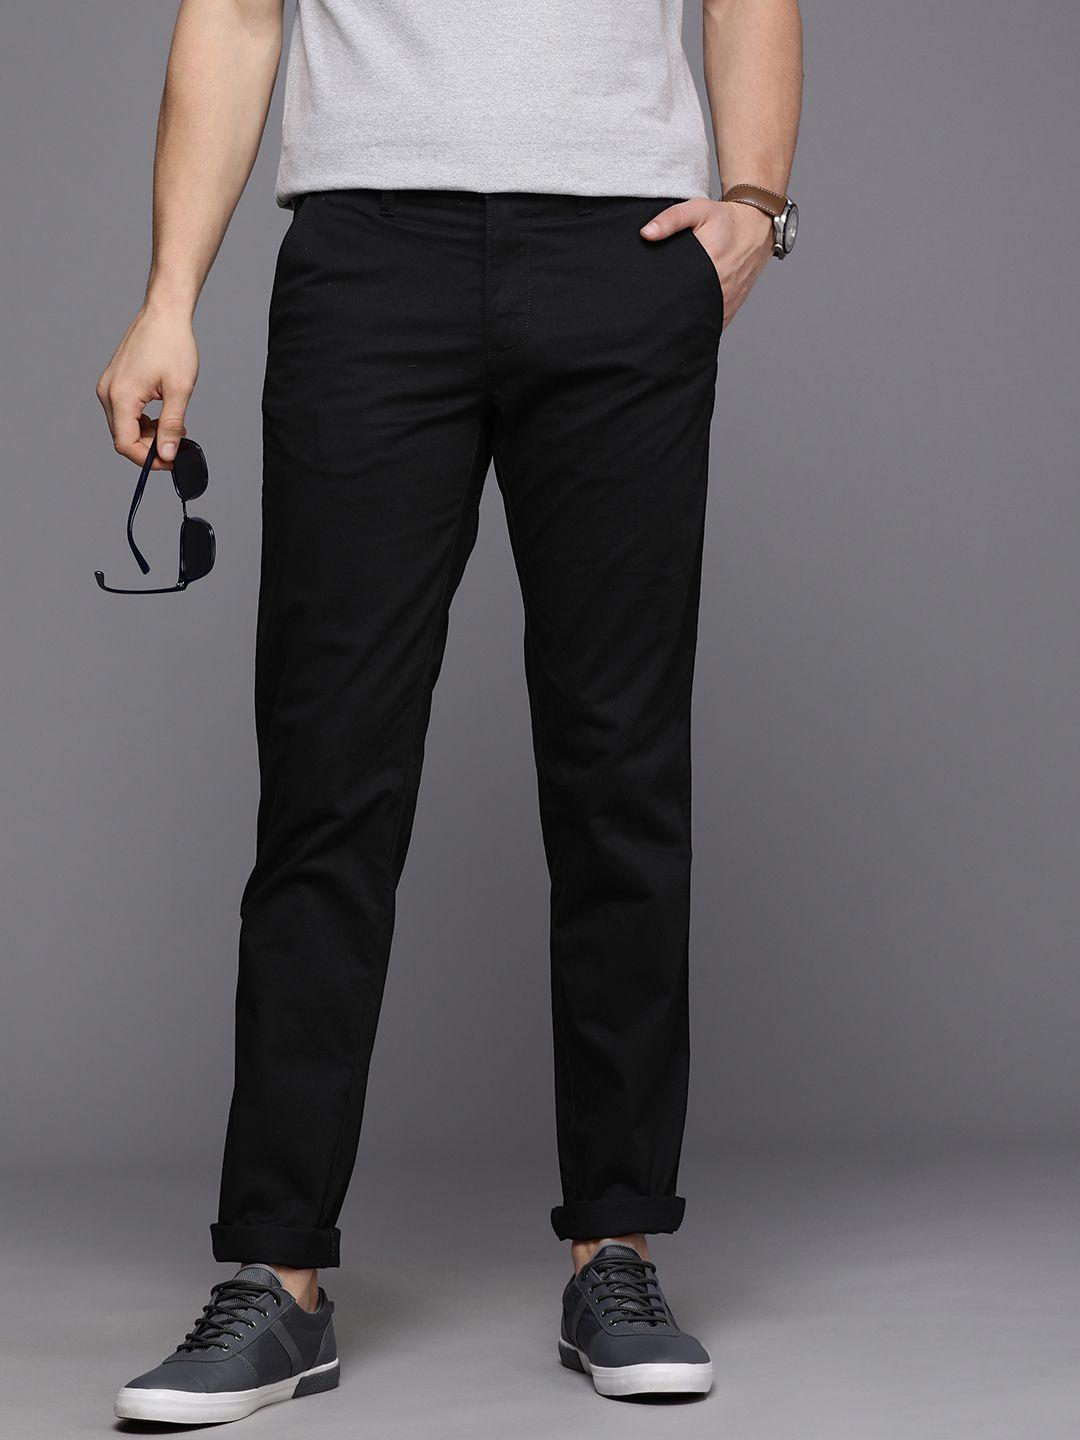 louis philippe sport men flat front casual trousers